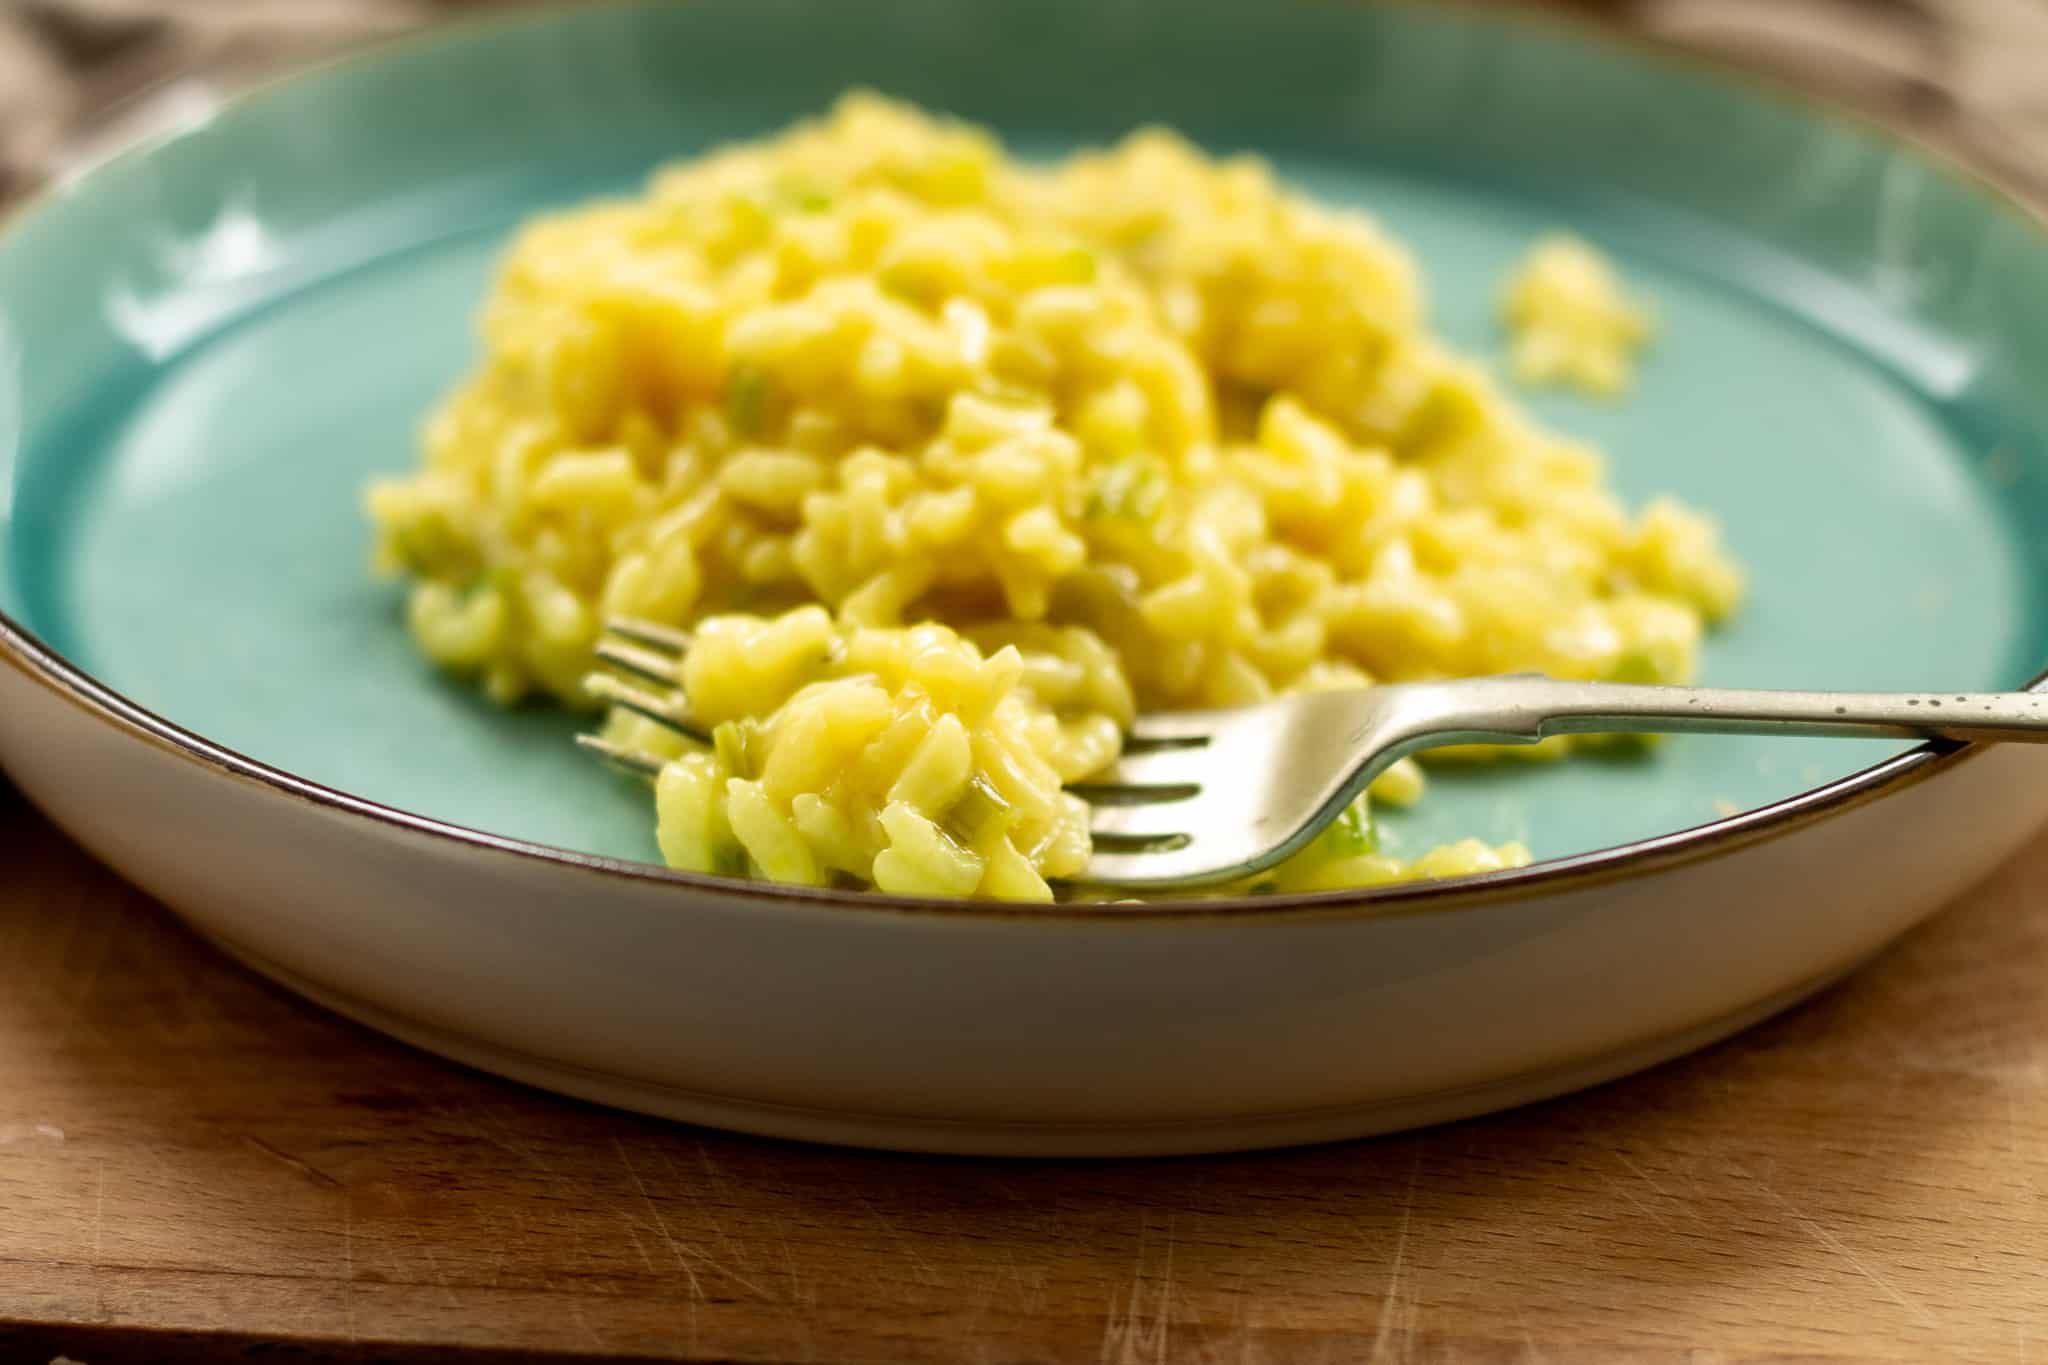 A plate with a serving of risotto.